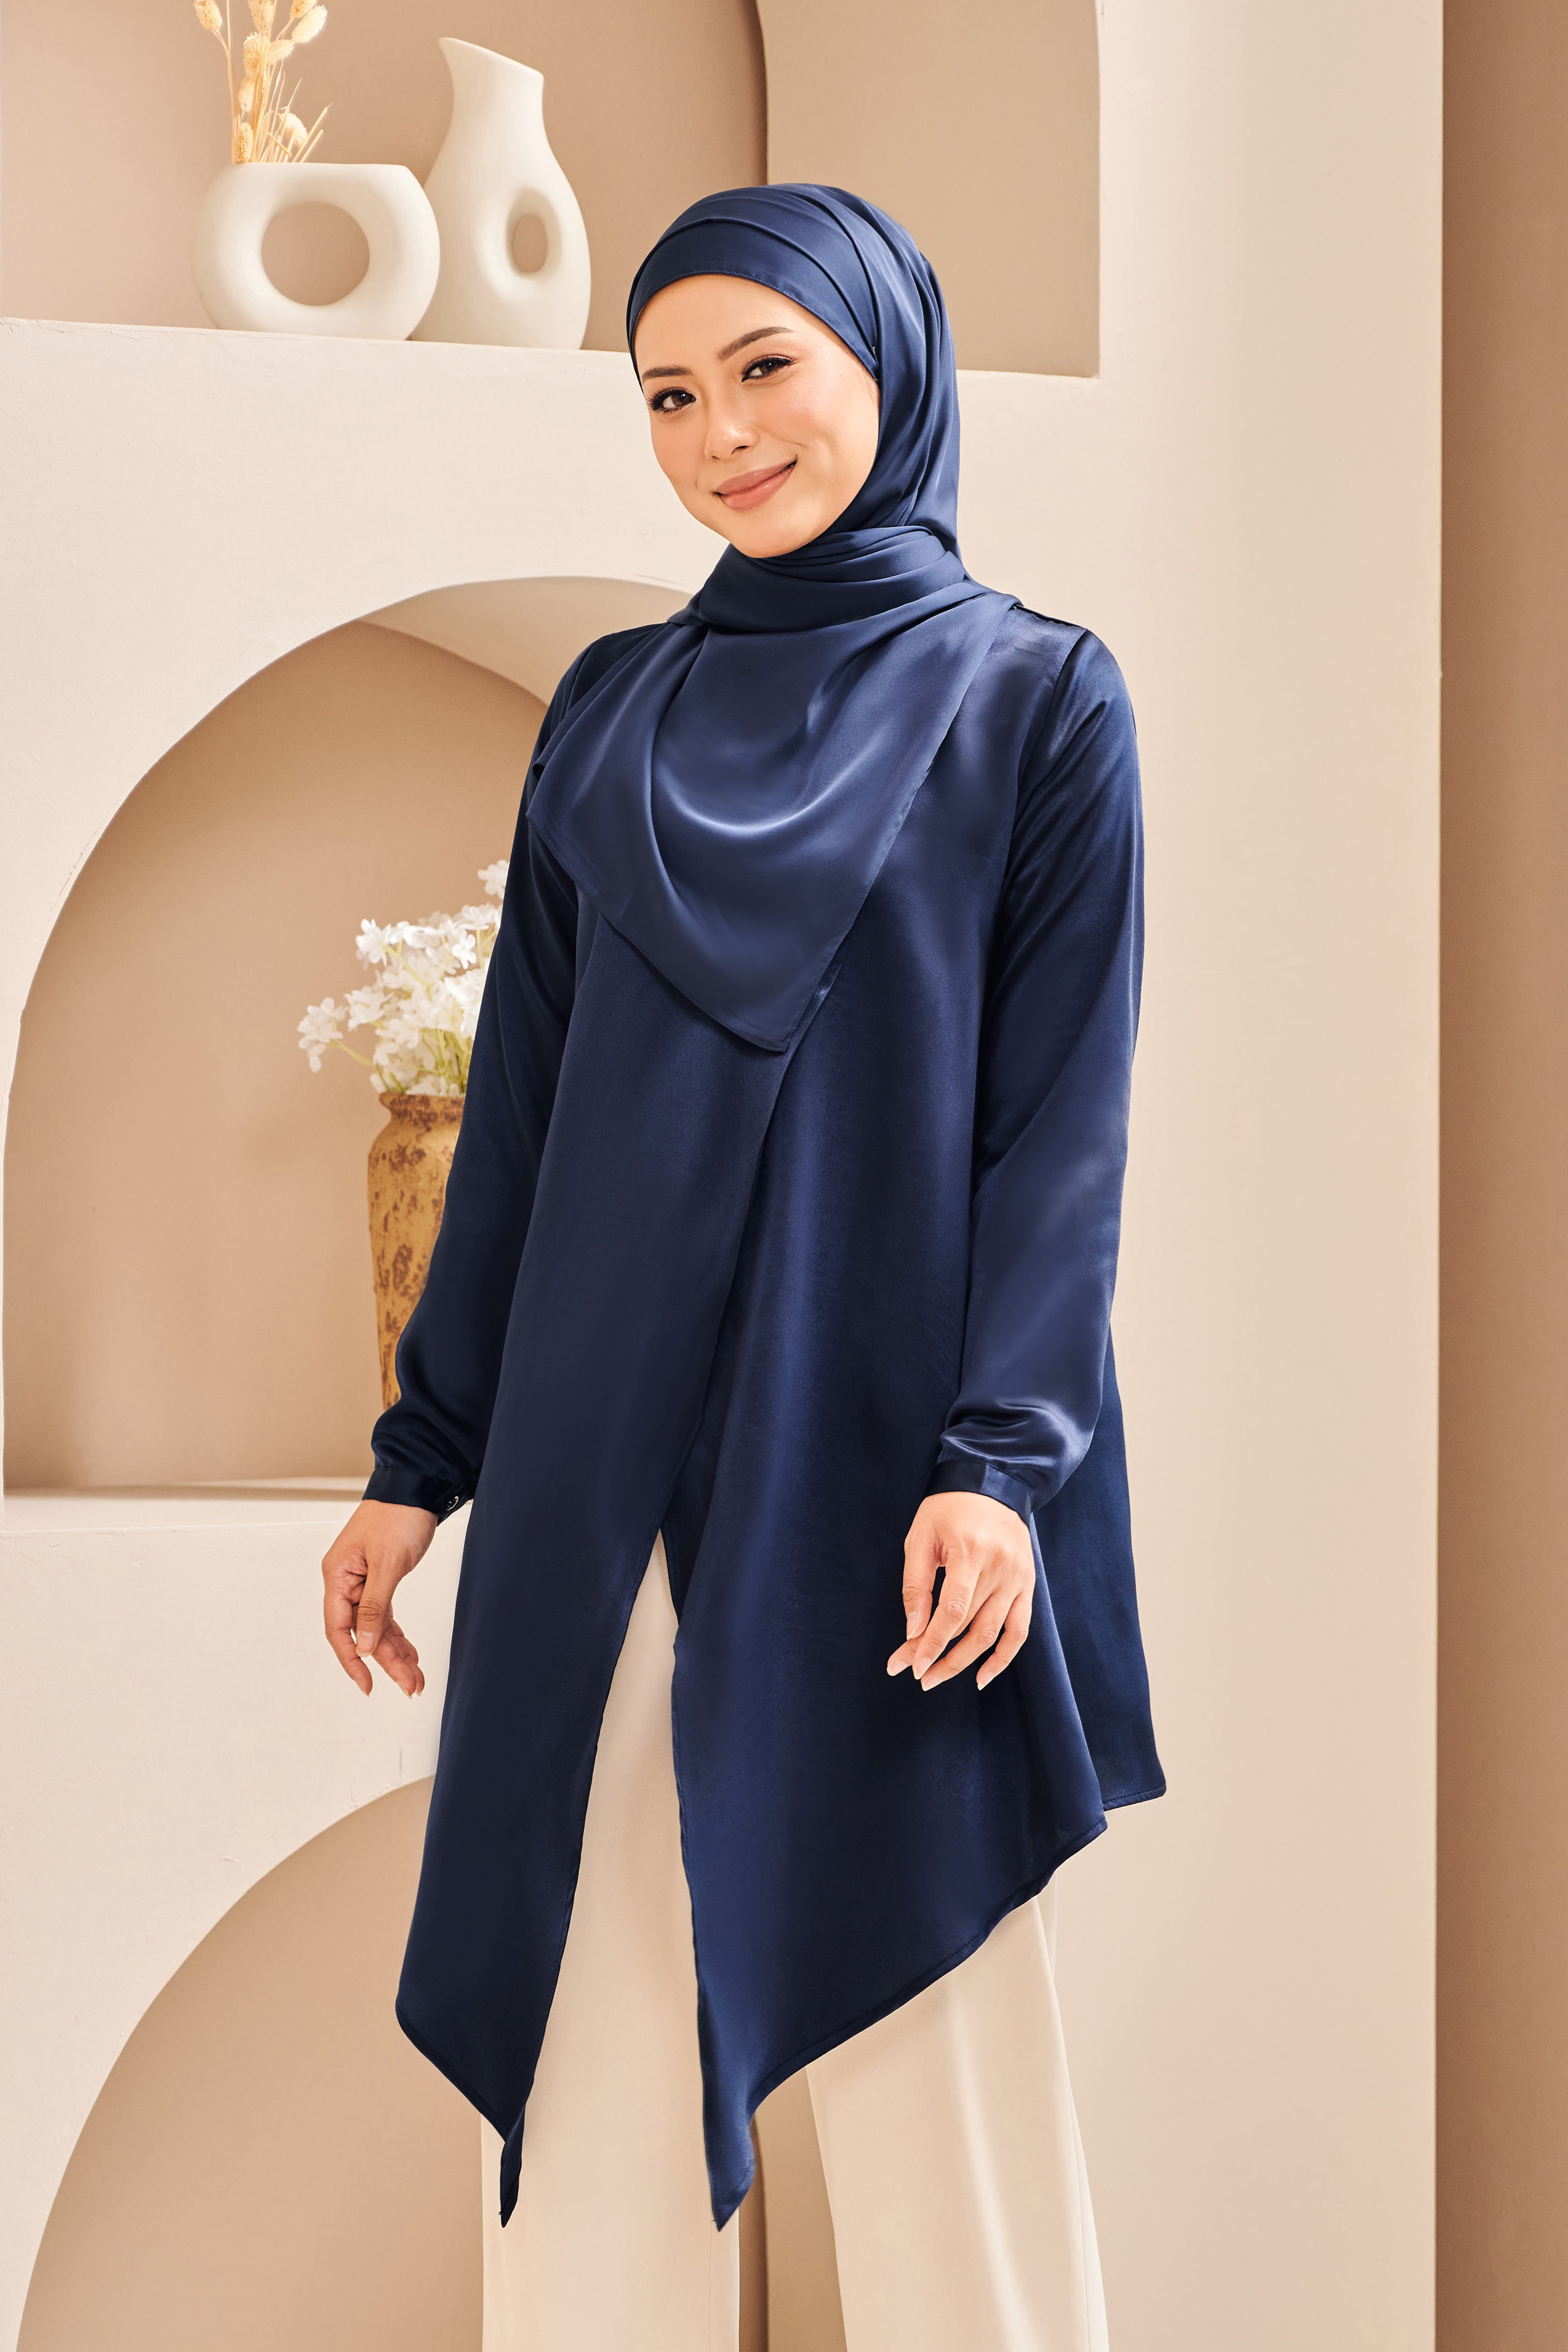 BRIA Blouse in Navy Blue